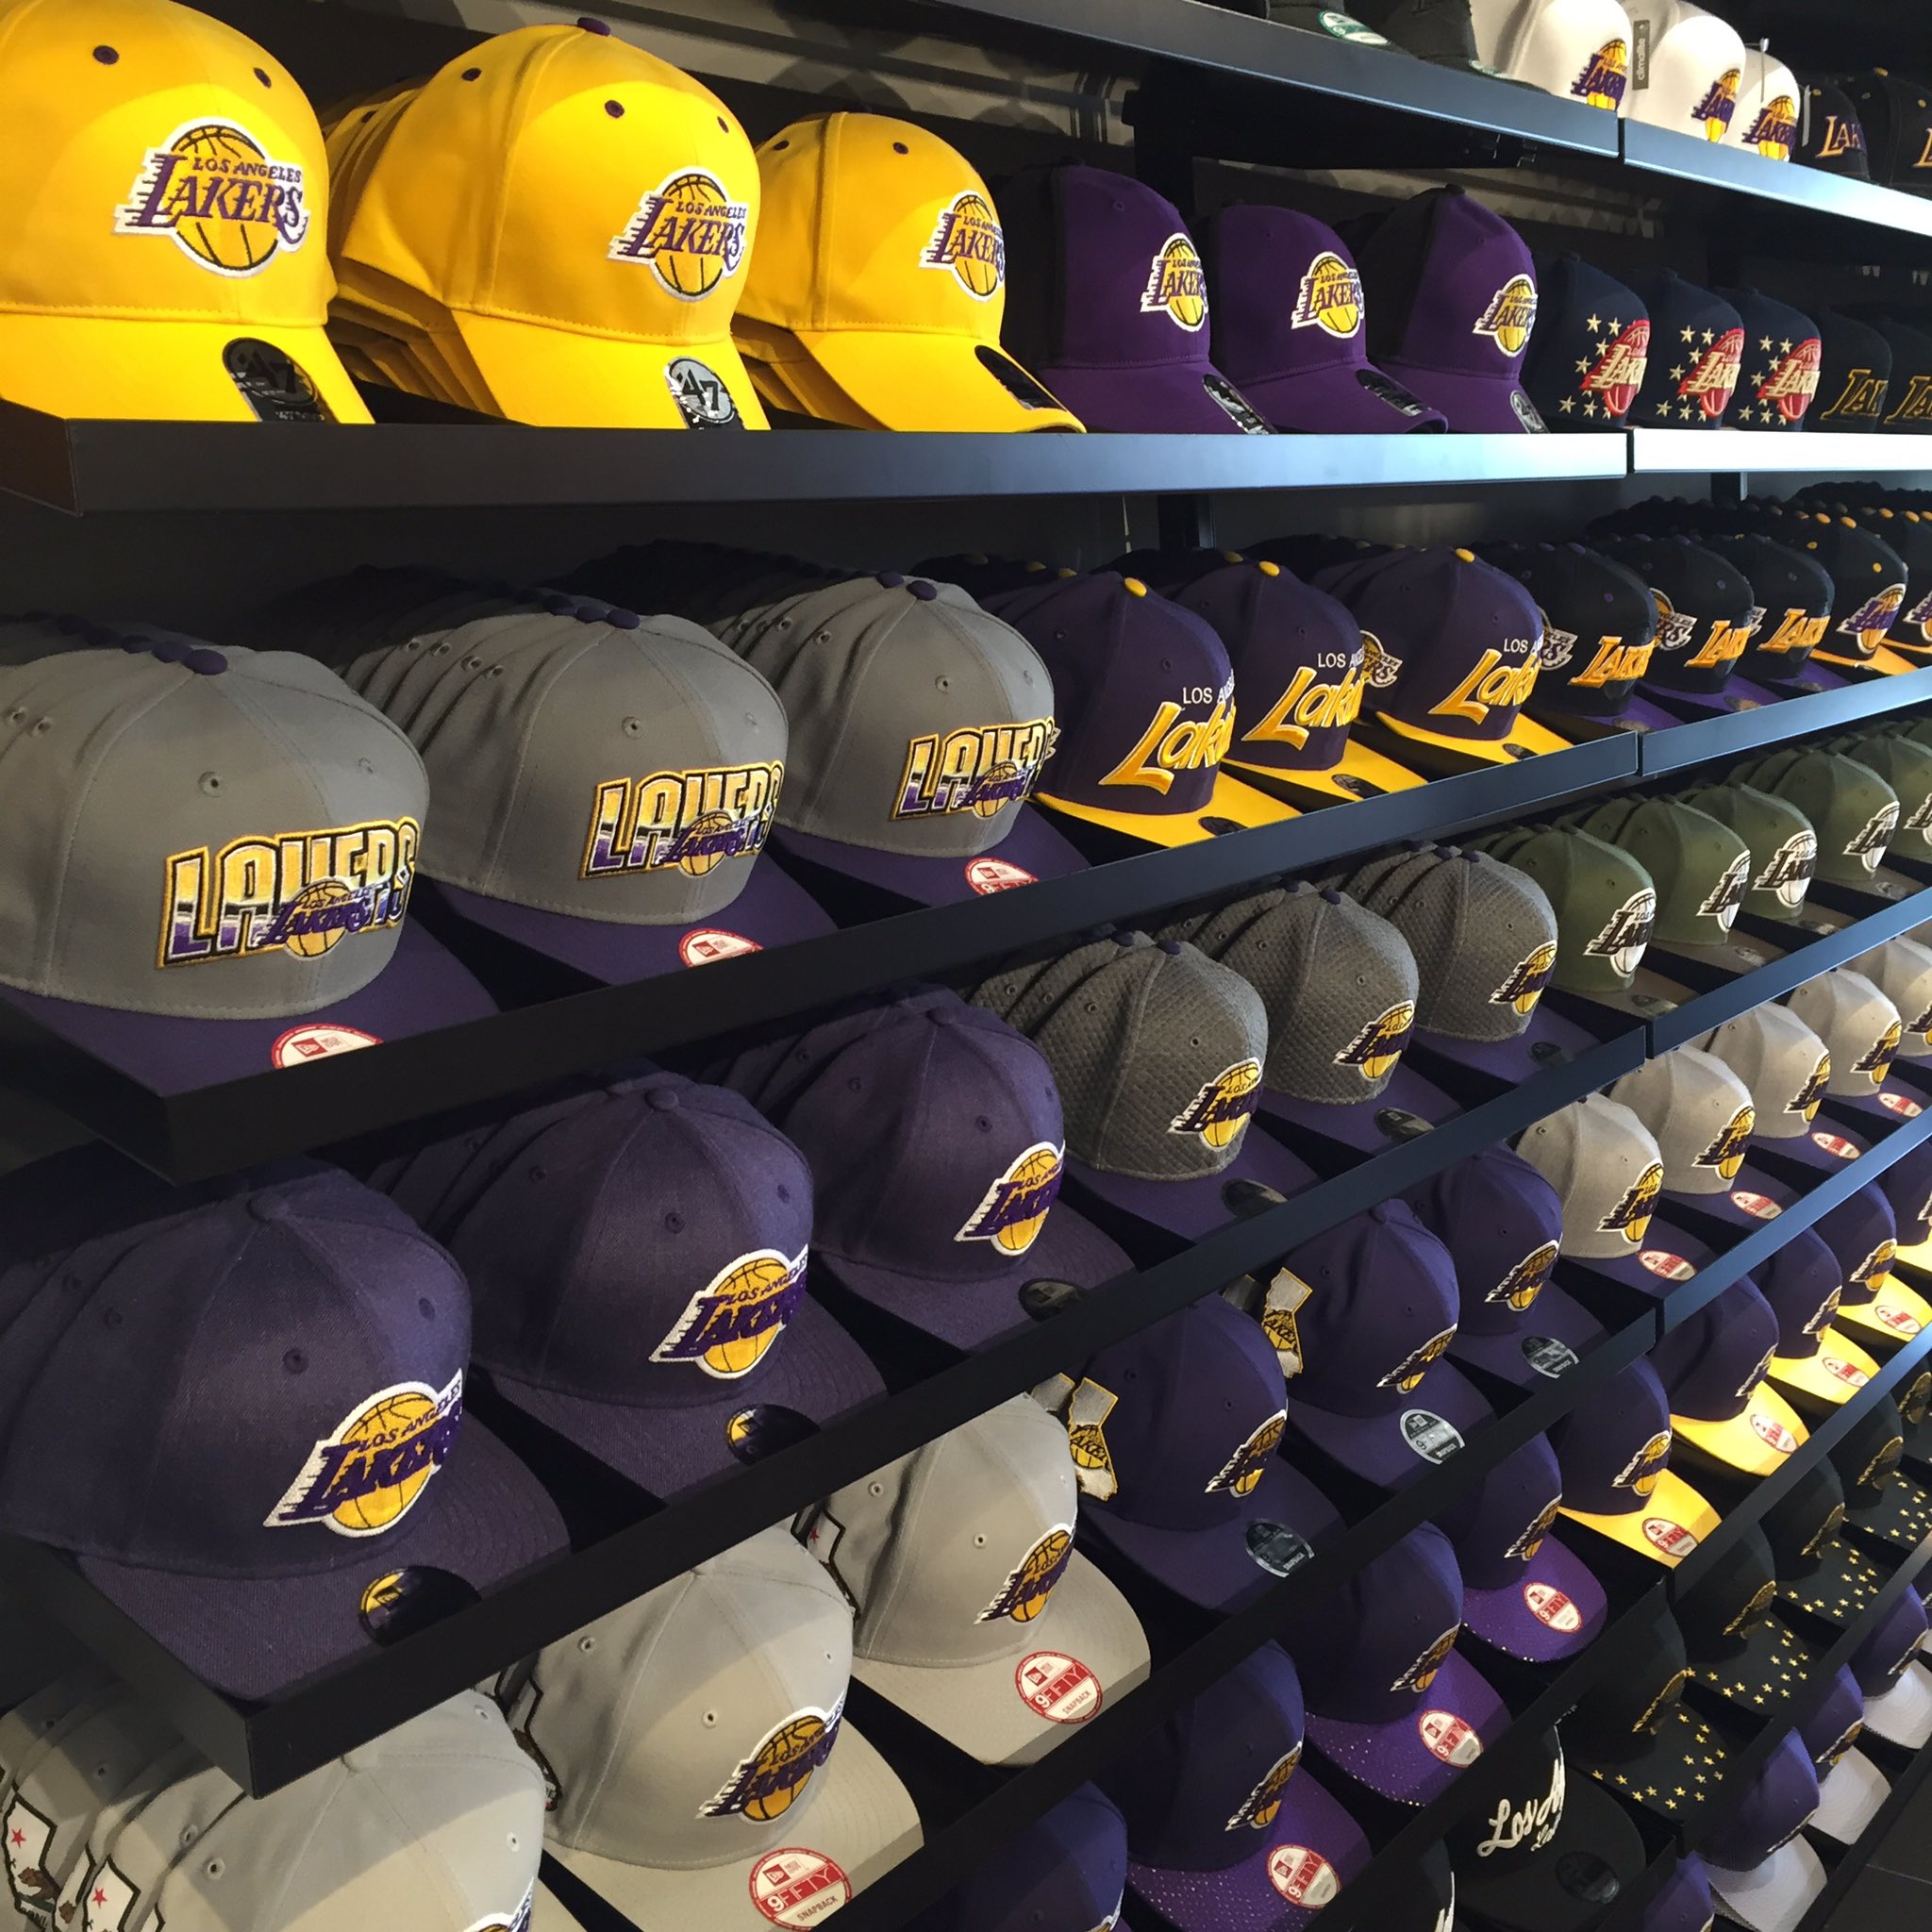 Lakers Store X:ssä: Check out all the awesome gear at the @LakersTeamShop  in El Segundo🙌🏼👌🏽🏀 #LakeShow  / X